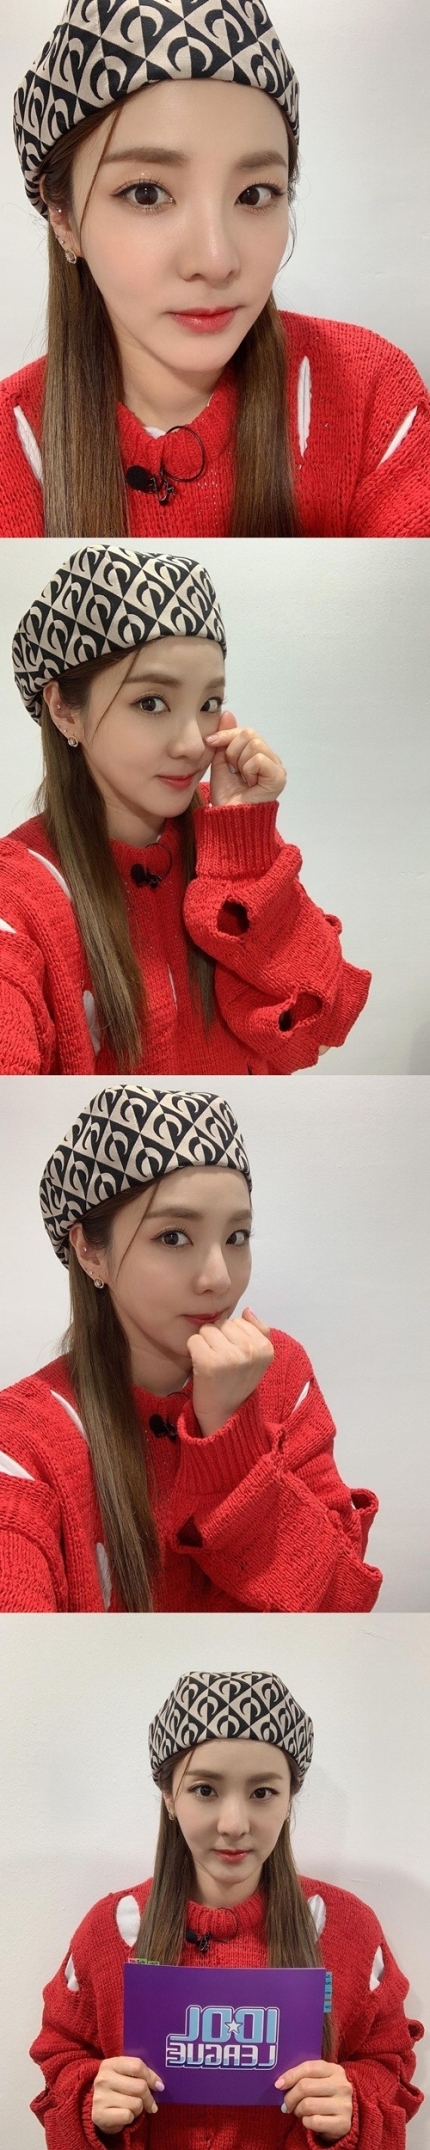 Instagram post of Sandara Park showing off her clear skin without any pores.